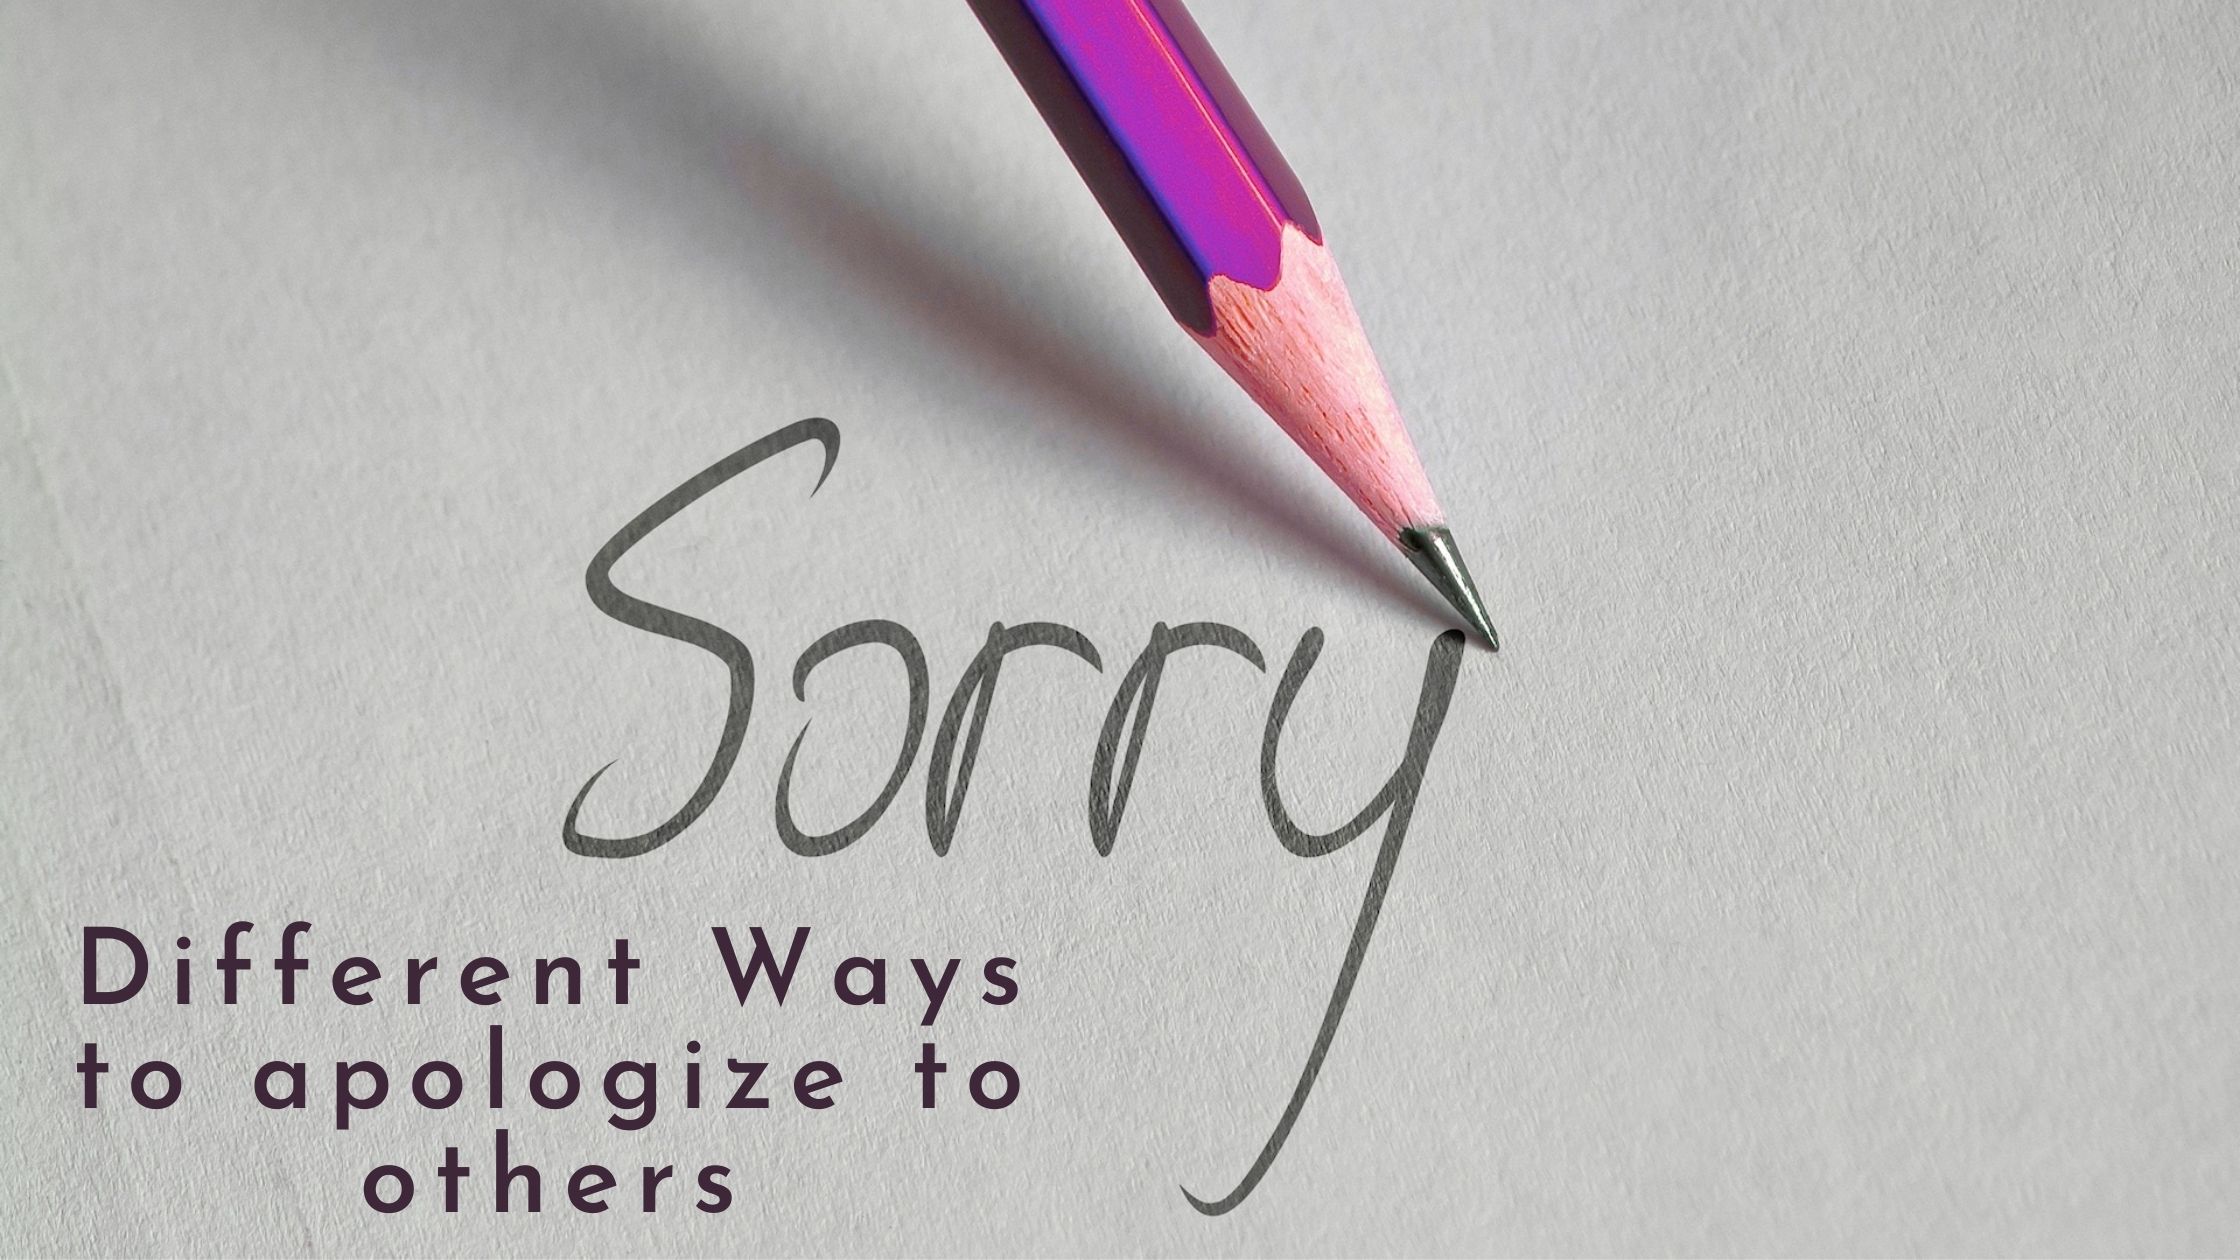 Different Ways to Apologize to others